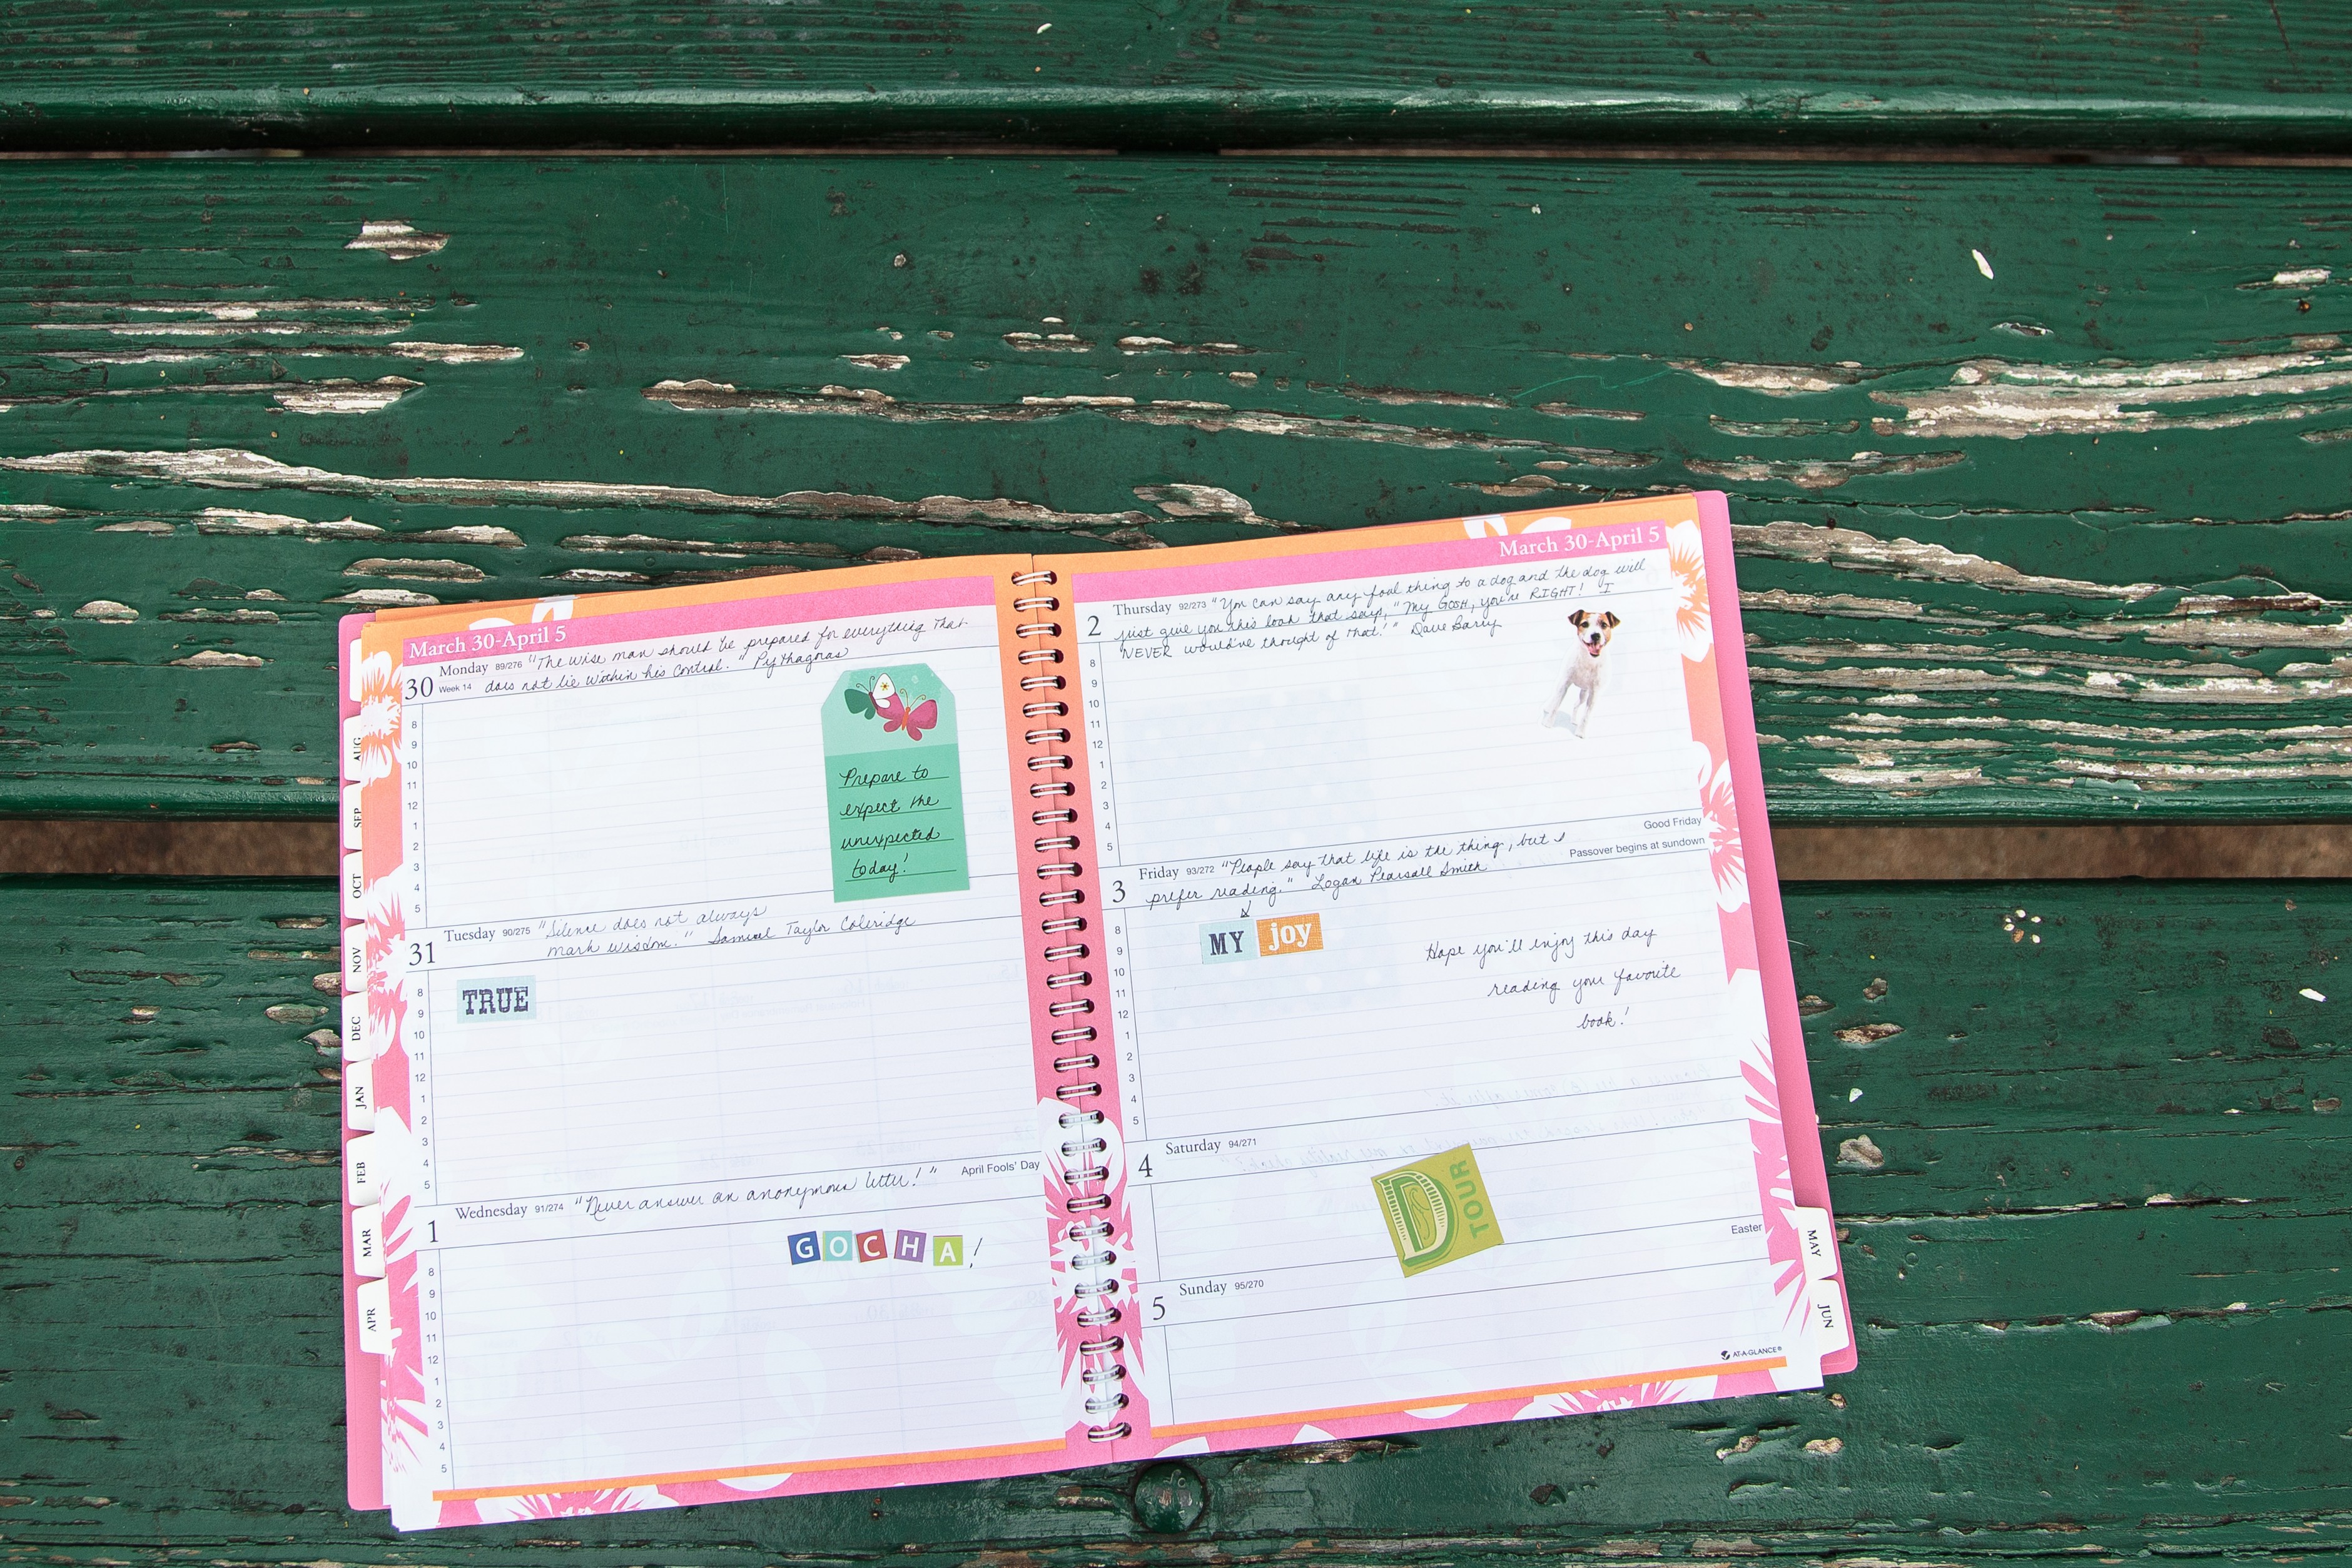 Dagmar's favorite piece of mail from Katherine: a detailed and personalized calendar!